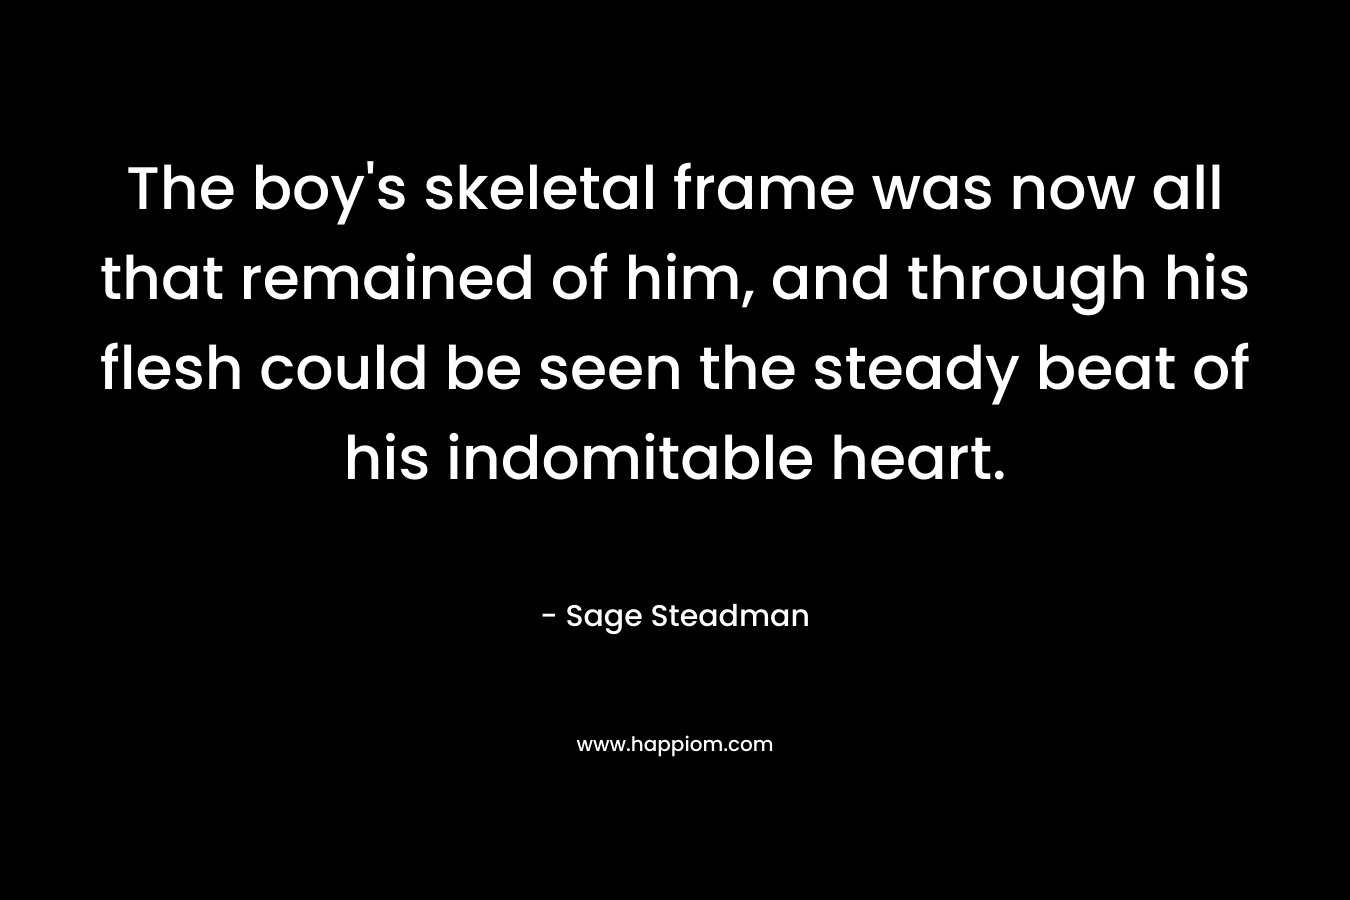 The boy's skeletal frame was now all that remained of him, and through his flesh could be seen the steady beat of his indomitable heart.